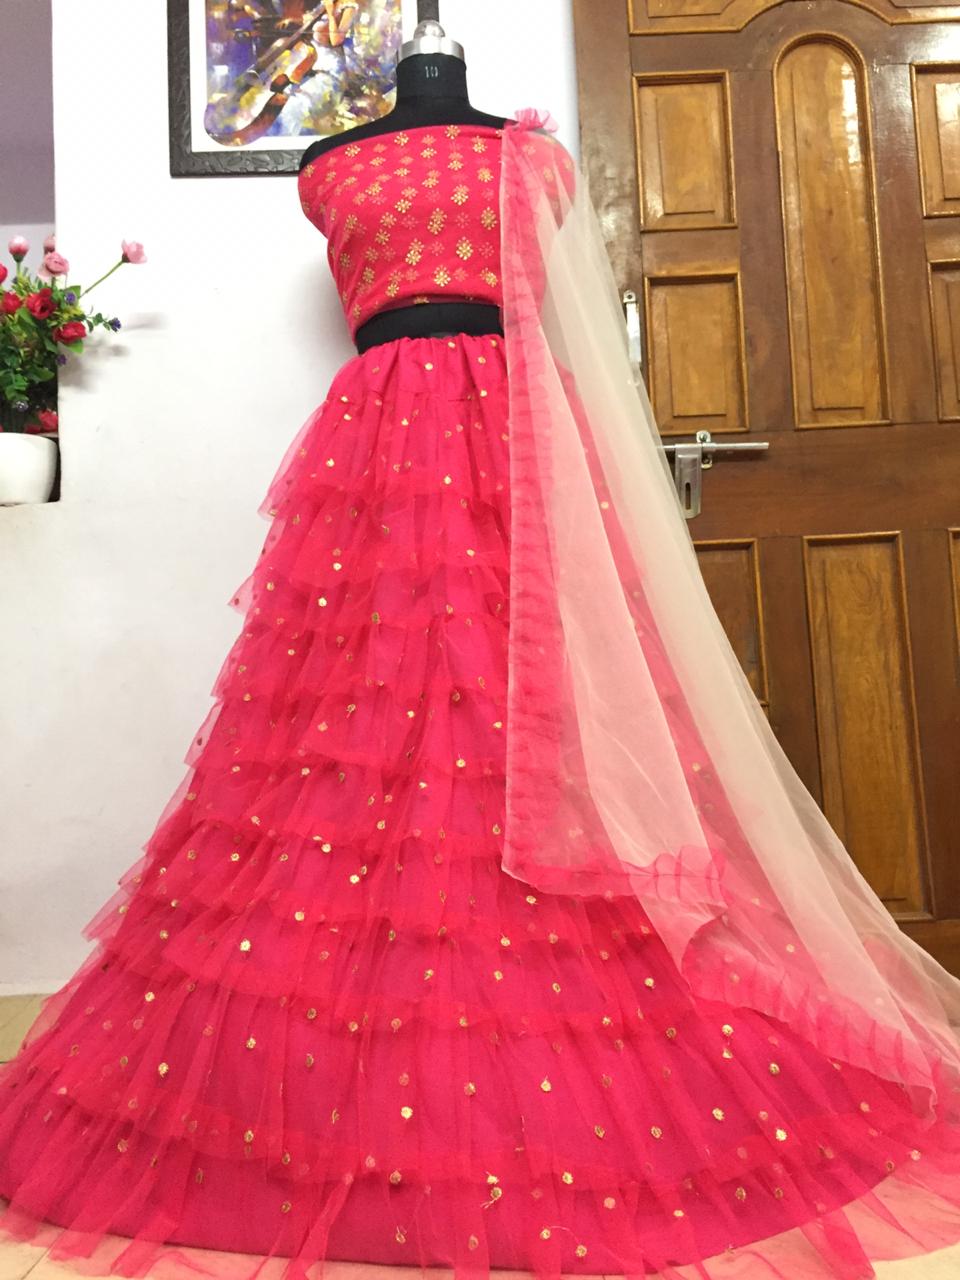 15802 FOX GEORGETTE LATEST TRENDY FANCY FASHIONABLE STYLISH CLASSY PARTY  WEAR WEDDING DESIGNER READYMADE SPARKING HALDI CEREMONY SPECIAL RUFFLED  LEHENGA CHOLI BEST RATE BOUTIQUE COLLECTION SUPPLIER IN INDIA MAURITIUS  SINGAPORE - Reewaz